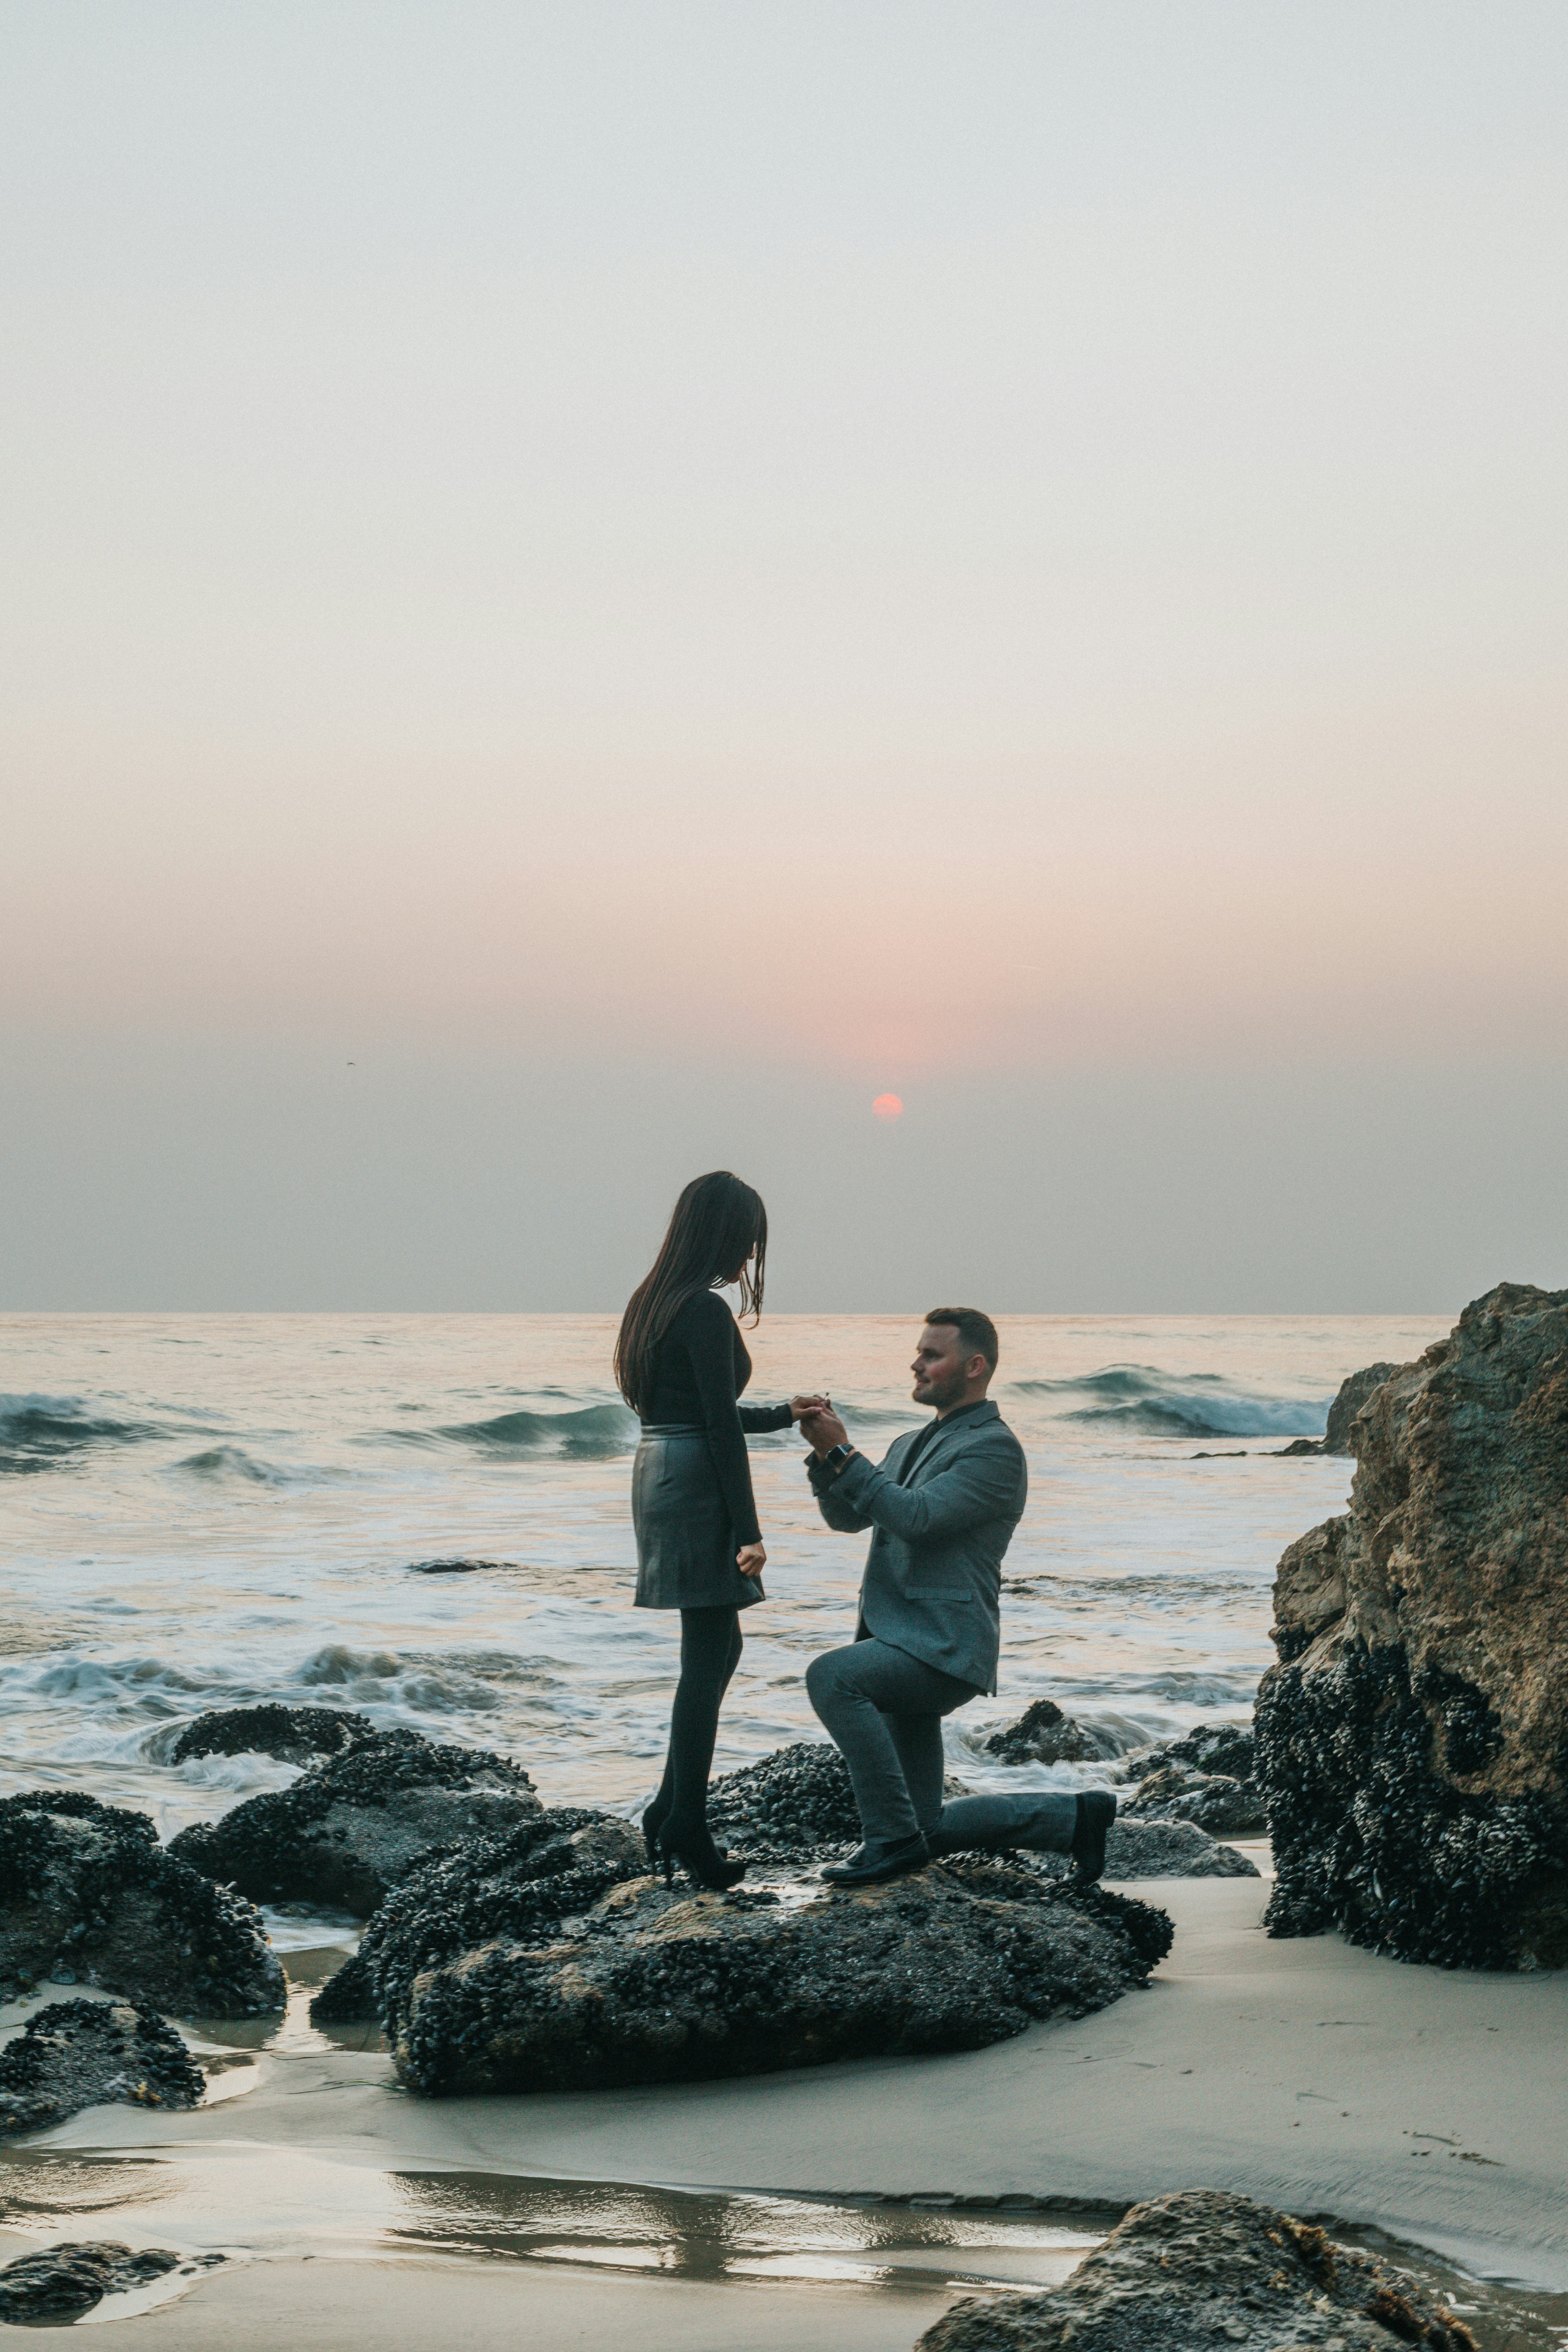 great photo recipe,how to photograph man kneeling in front of woman on rock at beach